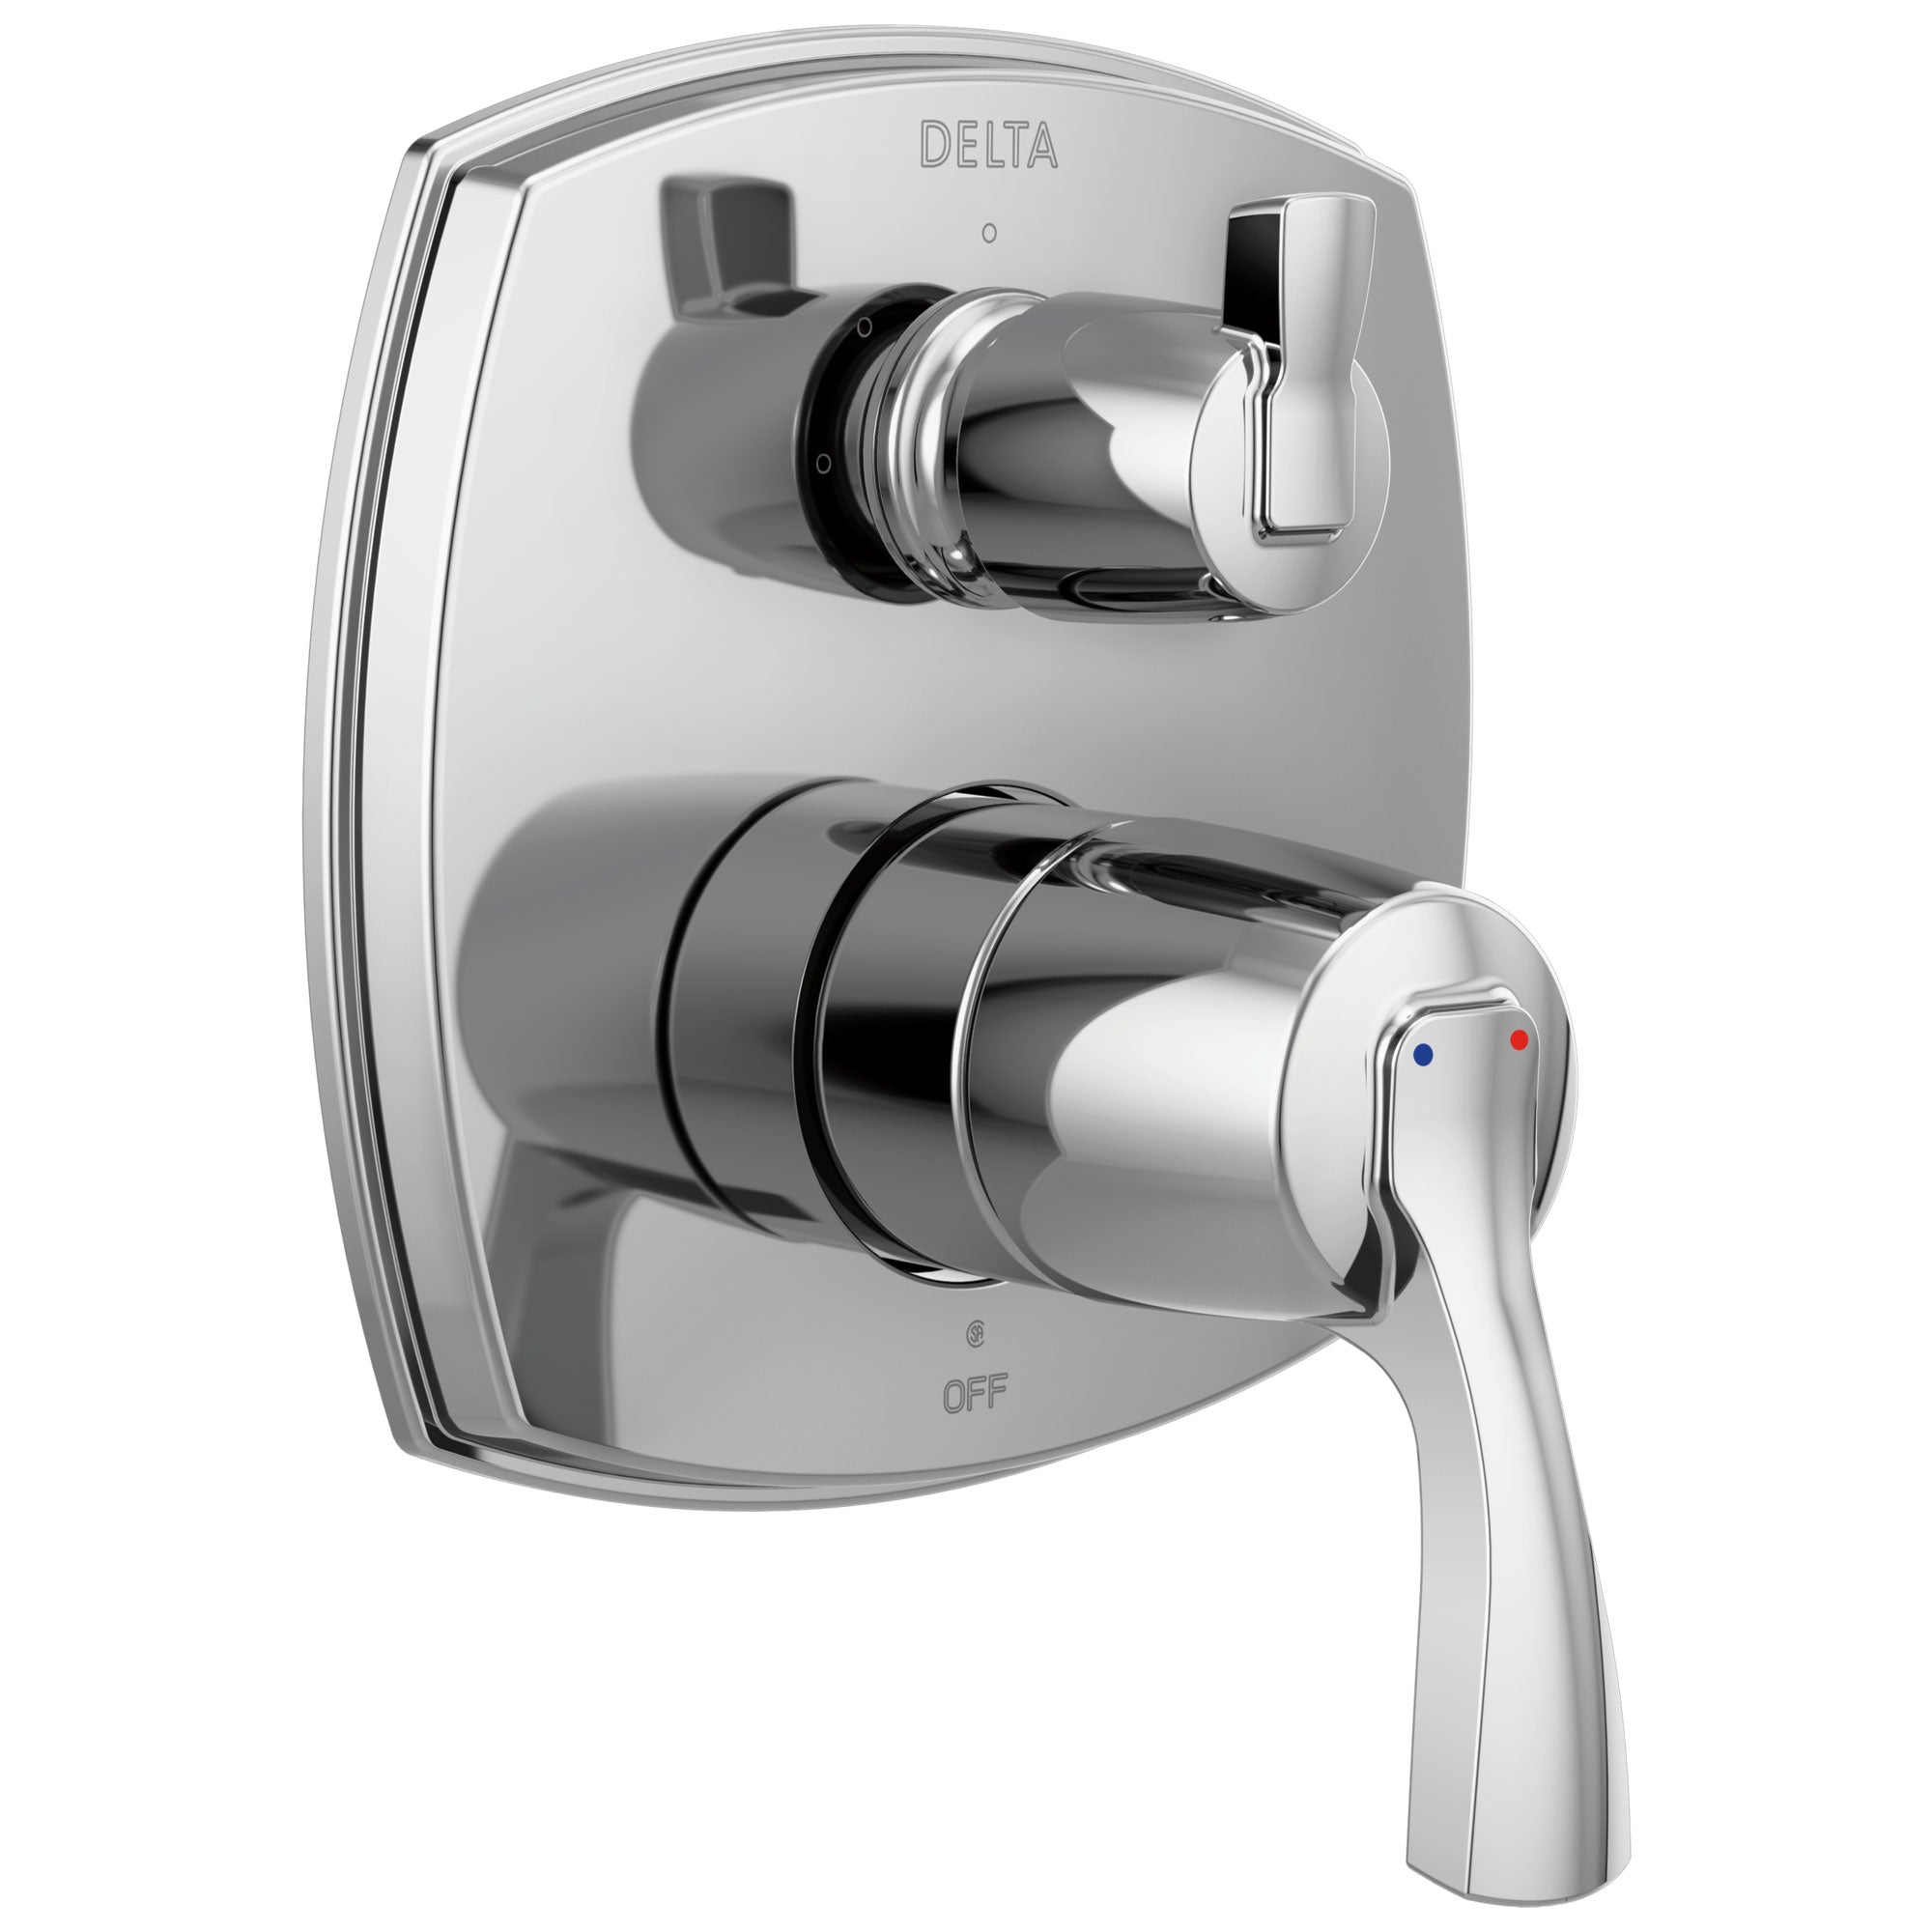 Delta Stryke Chrome Finish 14 Series Shower System Control with 3 Function Integrated Lever Handle Diverter Includes Valve and Handles D3198V